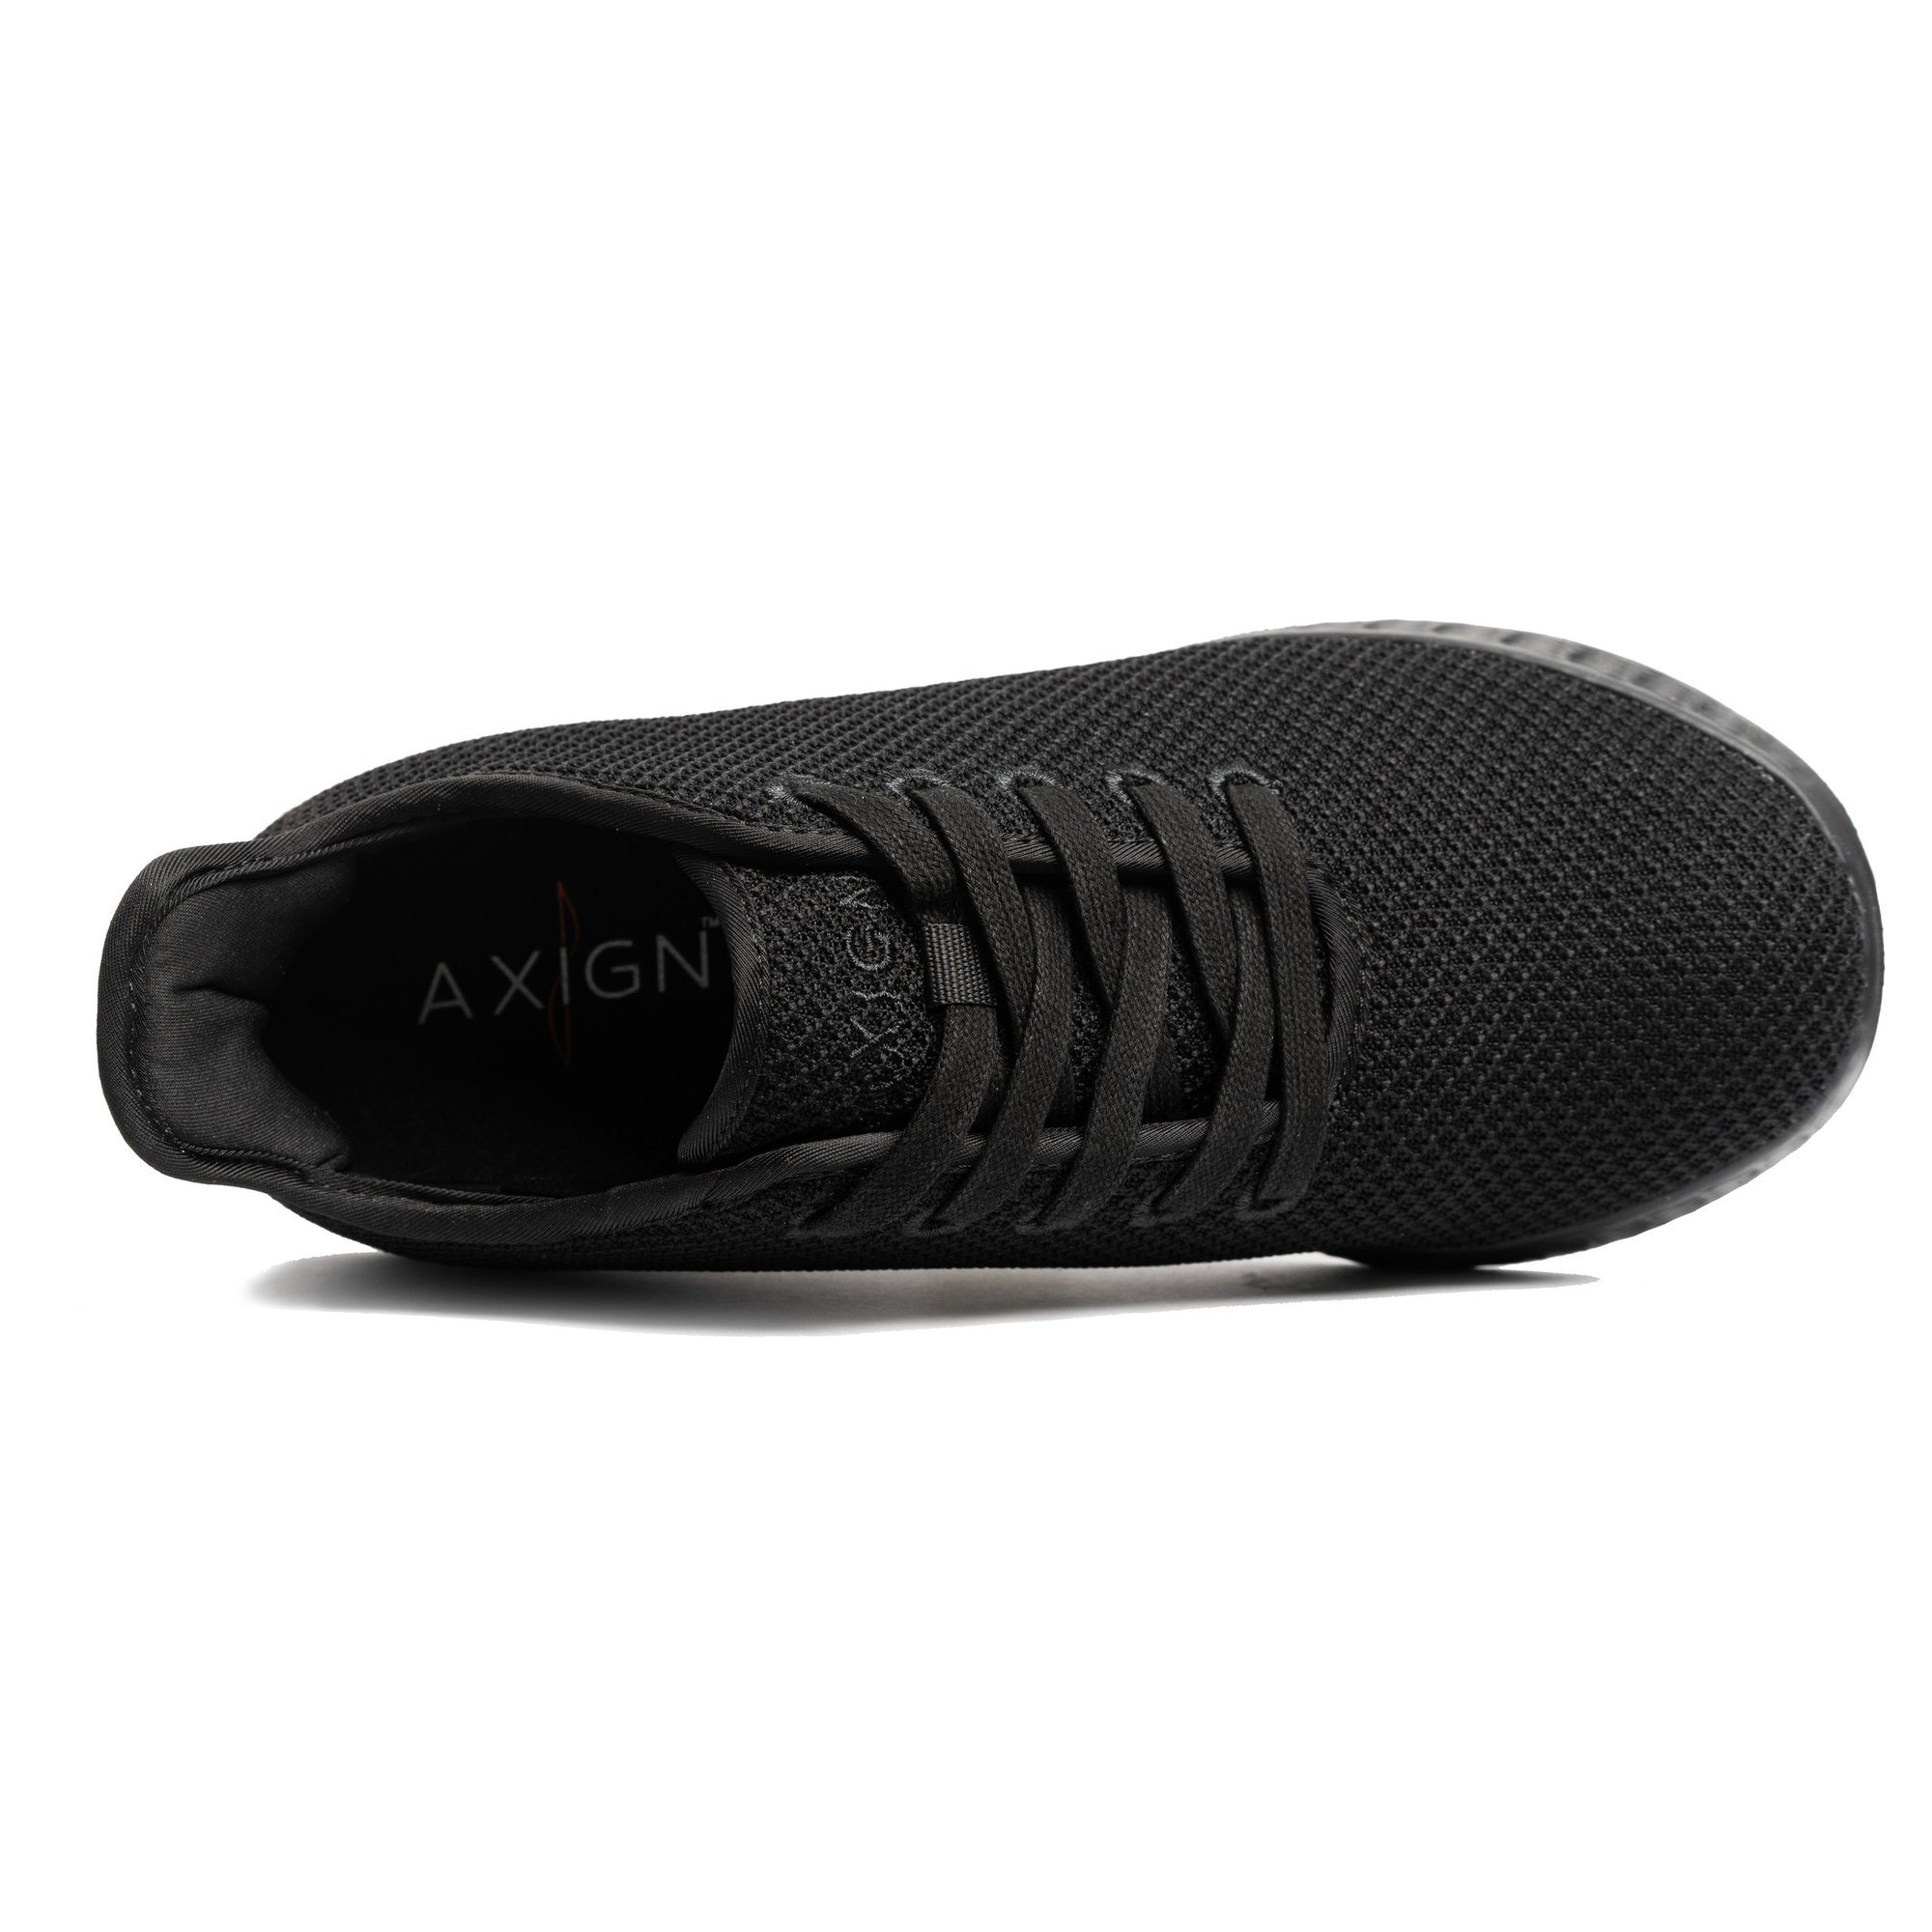 Axign River Lightweight Orthotic Shoe - Black - Holistic Foot Clinic